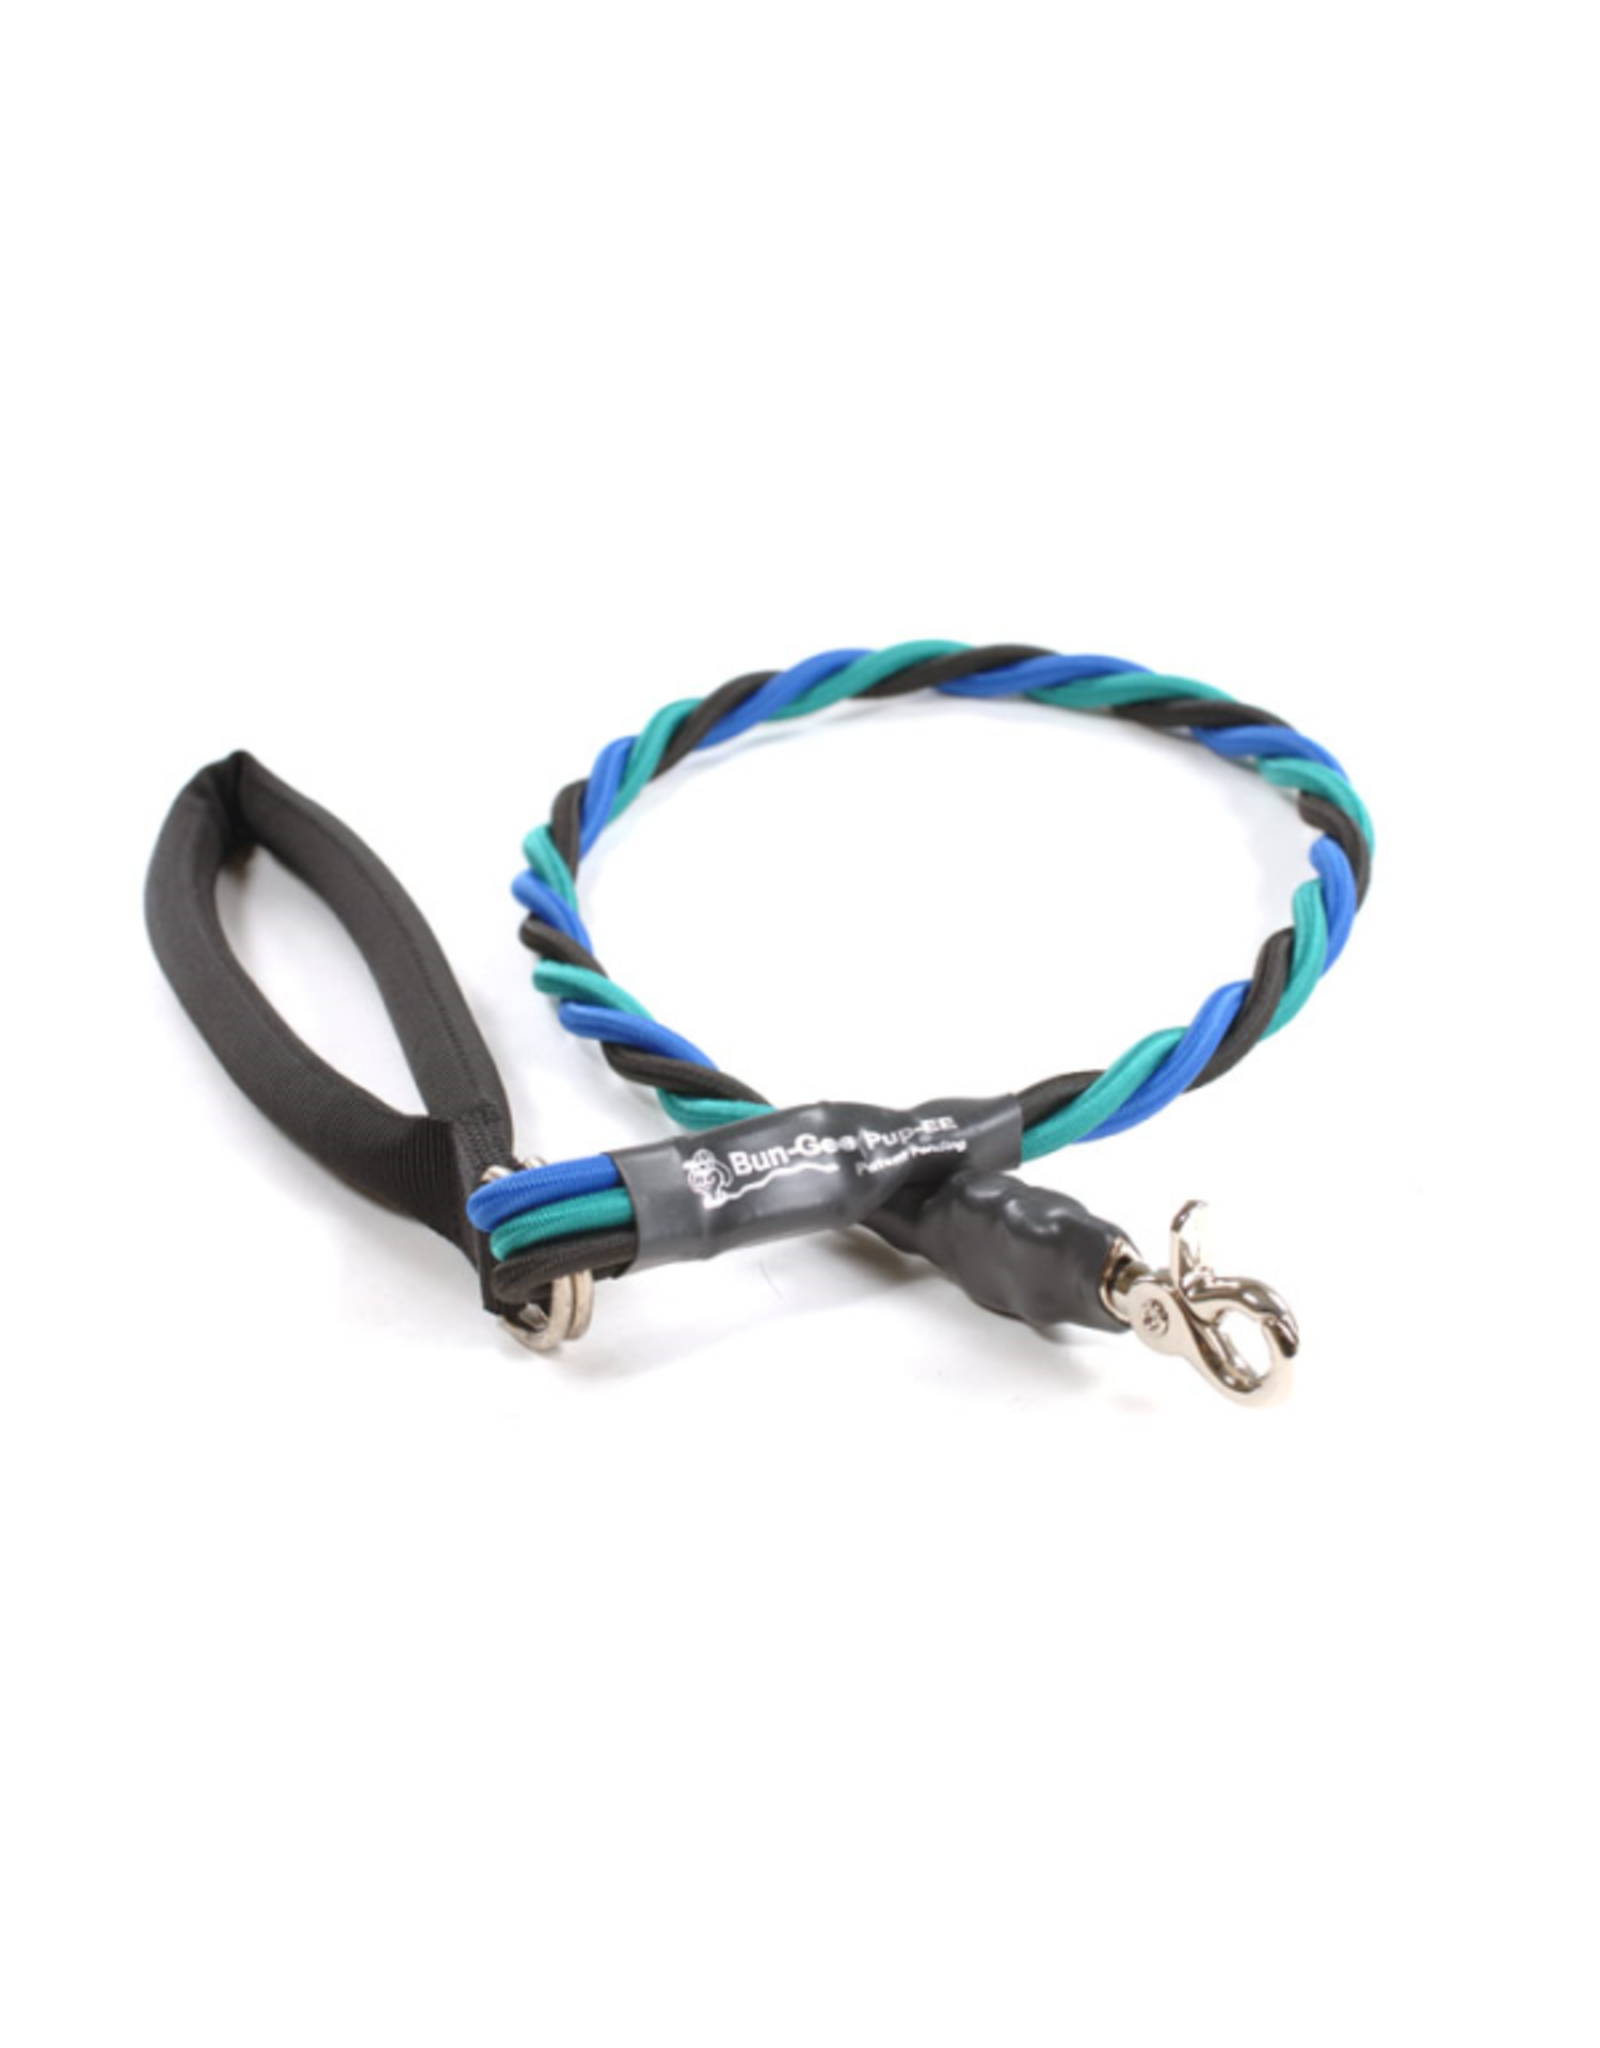 Bungee PupEE Leash 3' Teal/Blue/Blk LG Up to 65 lb